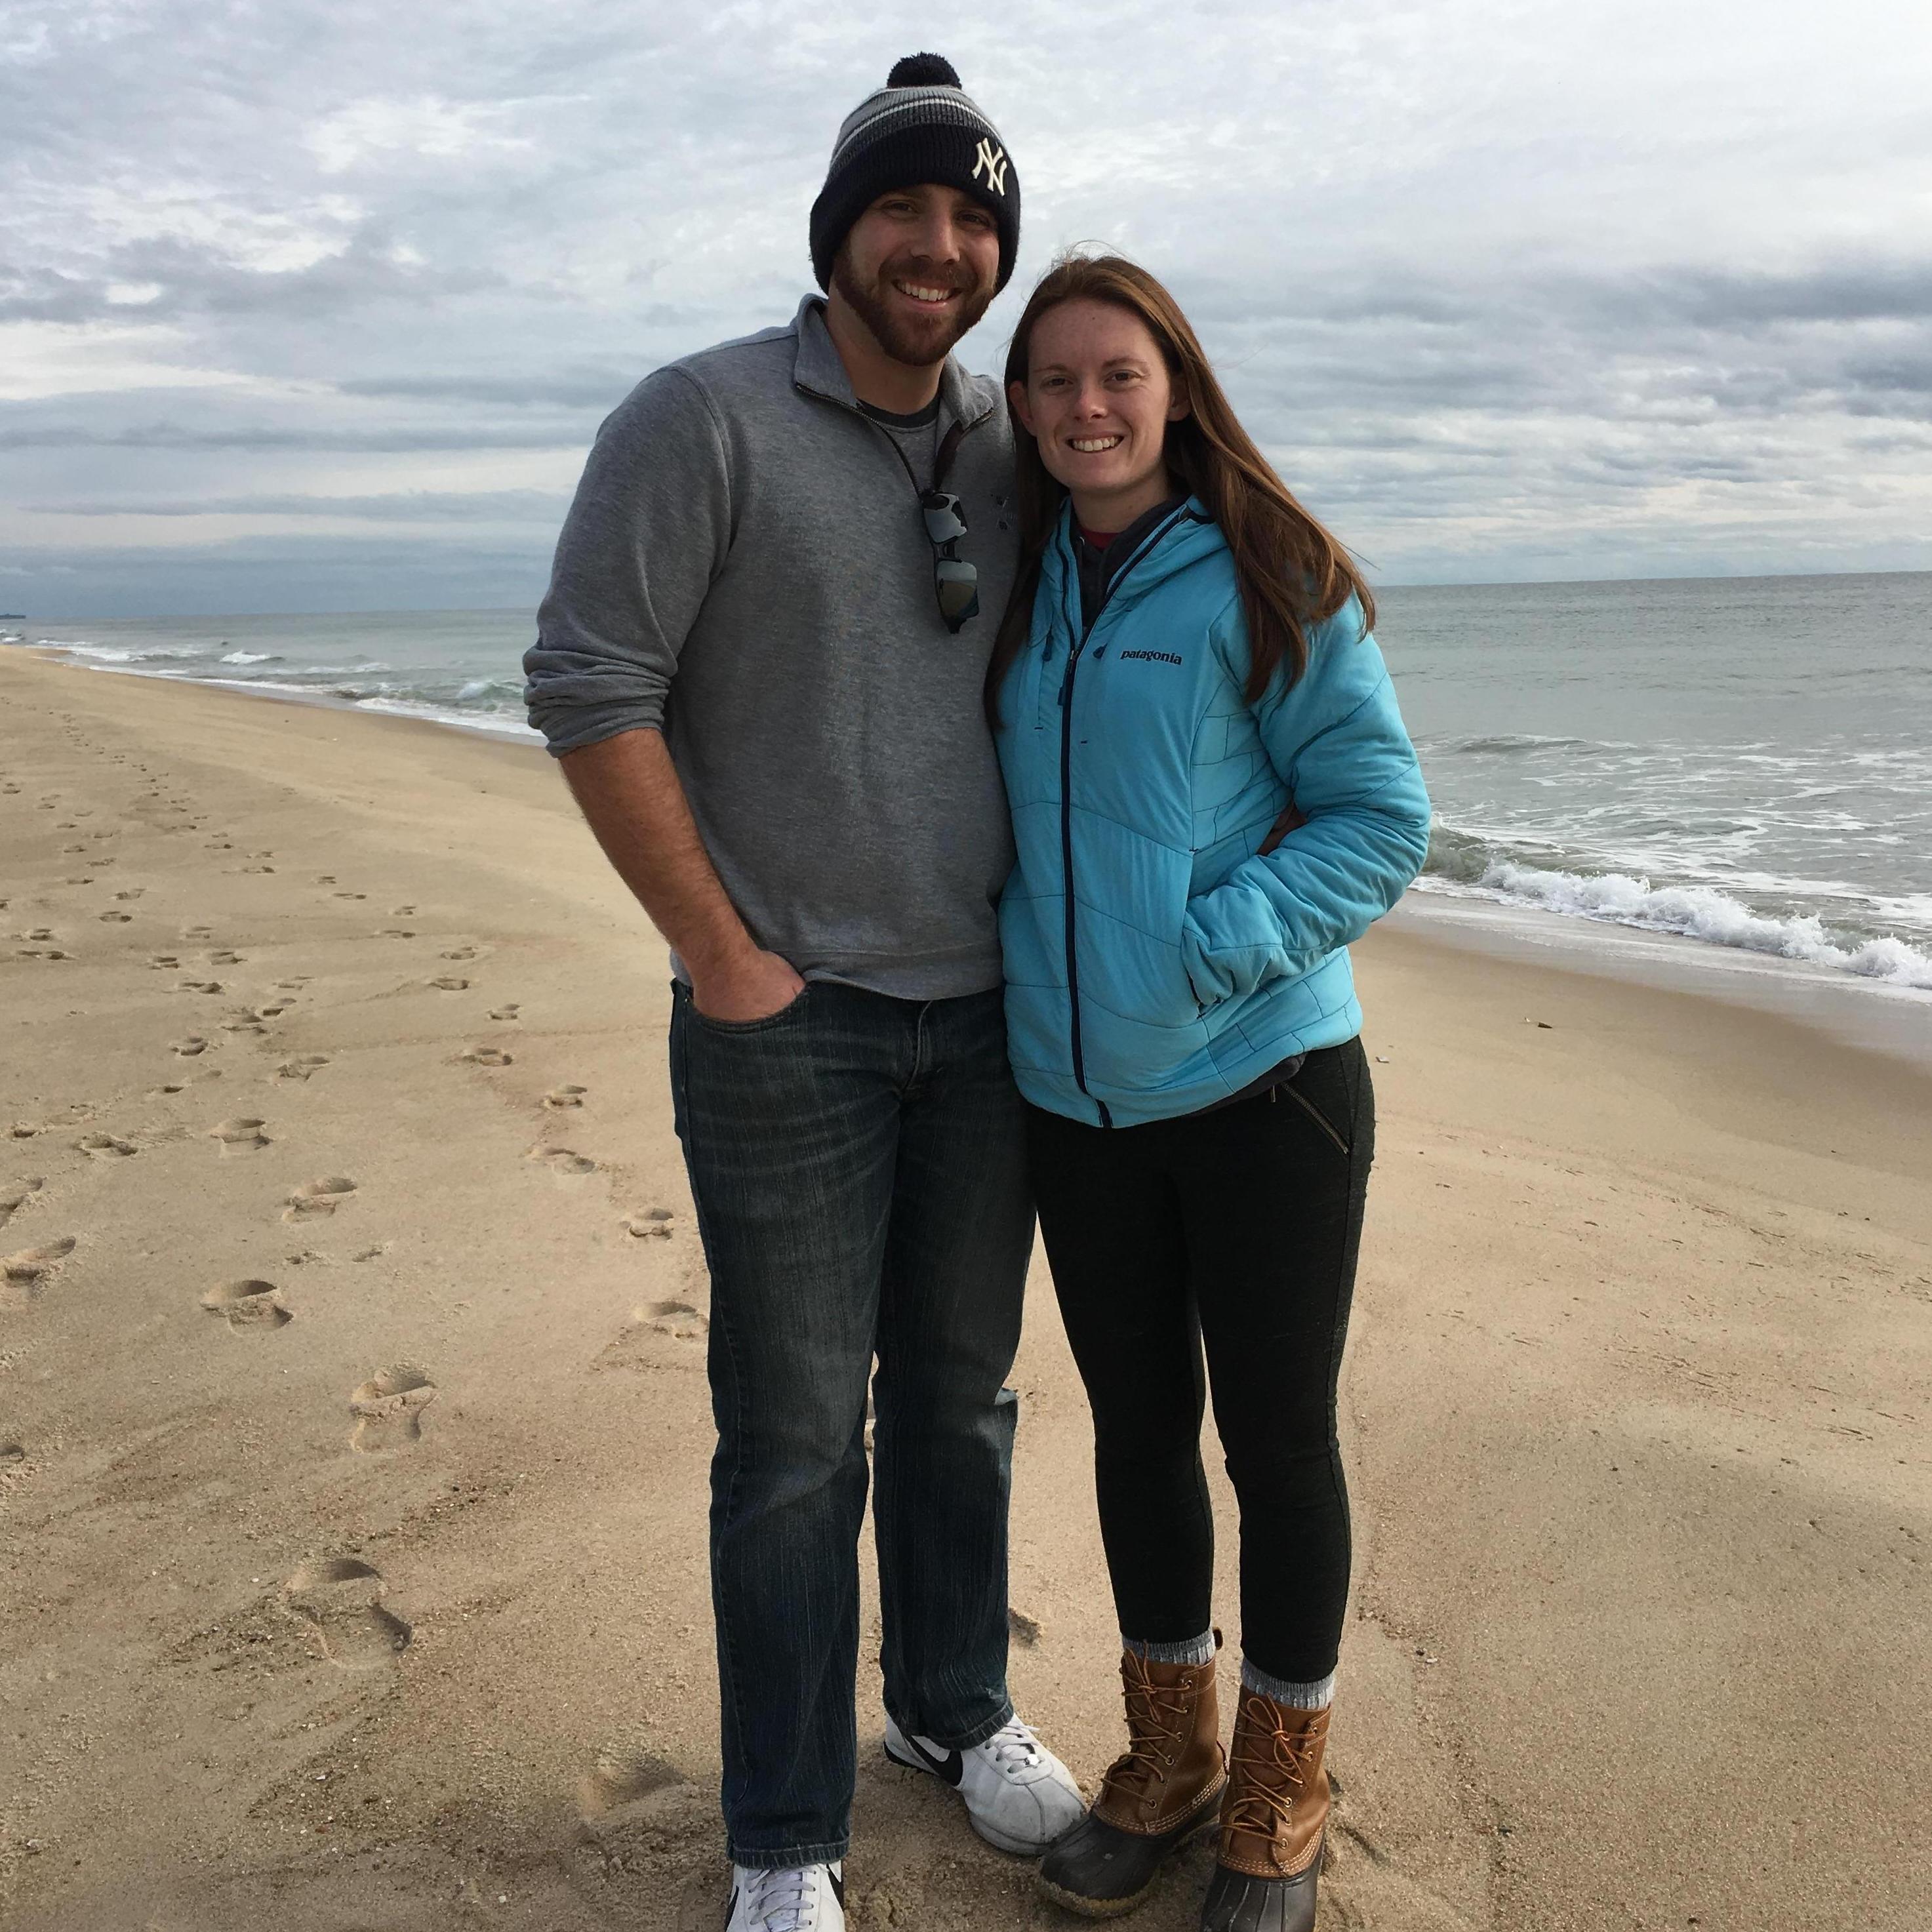 November 2017: Hanging out on the beach in Montauk!